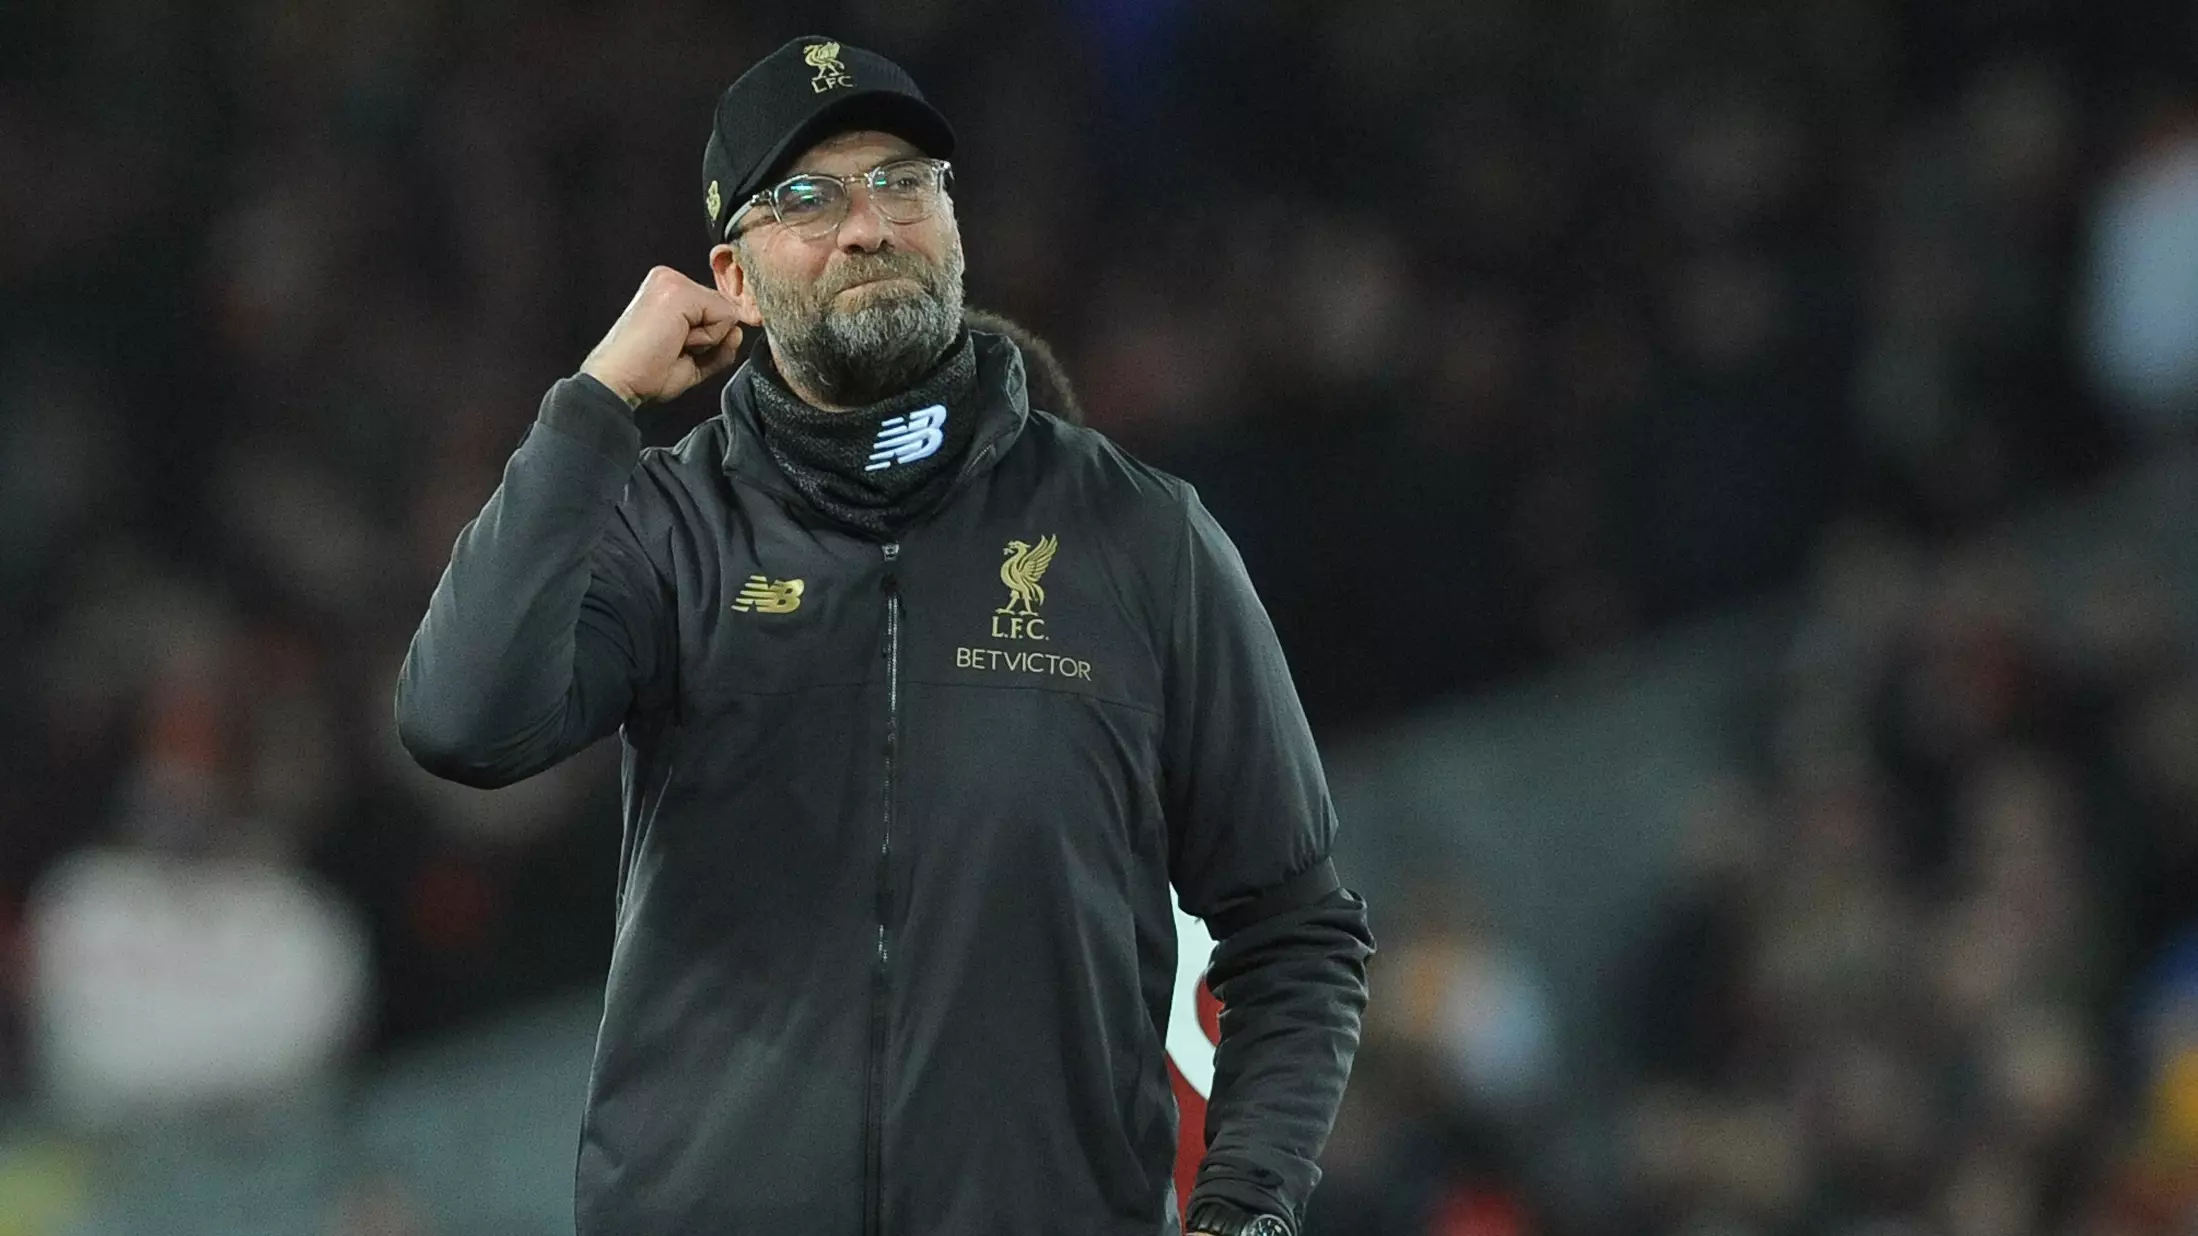 Why Jurgen Klopp 'Nearly Cried' During Liverpool's 5-1 Thumping Of Arsenal